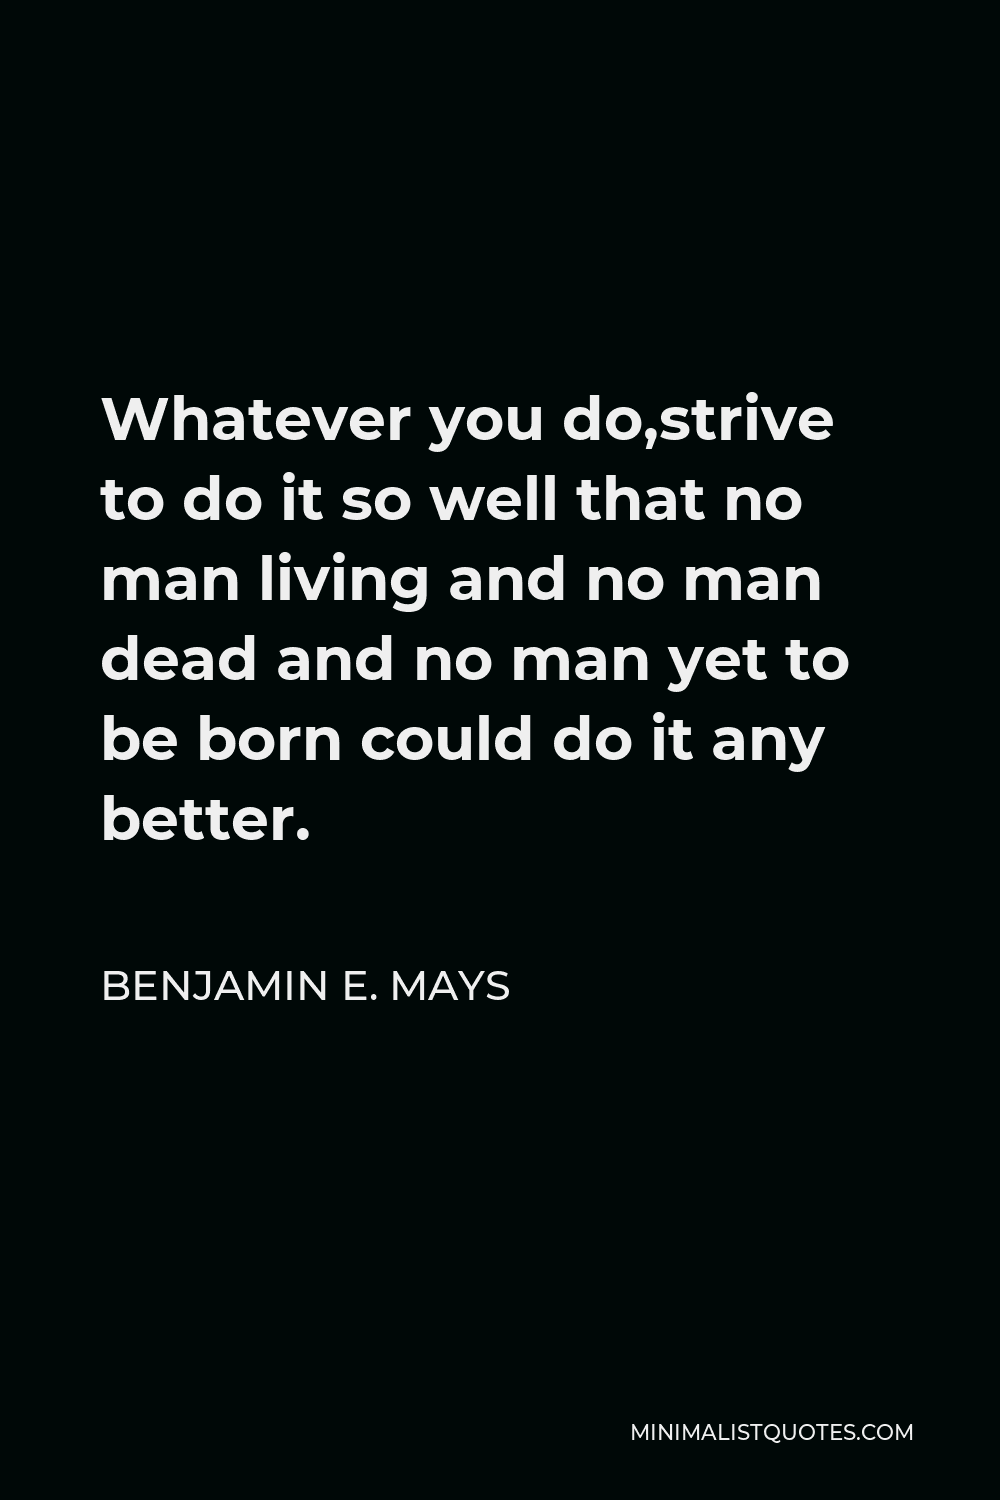 Benjamin E. Mays Quote - Whatever you do,strive to do it so well that no man living and no man dead and no man yet to be born could do it any better.